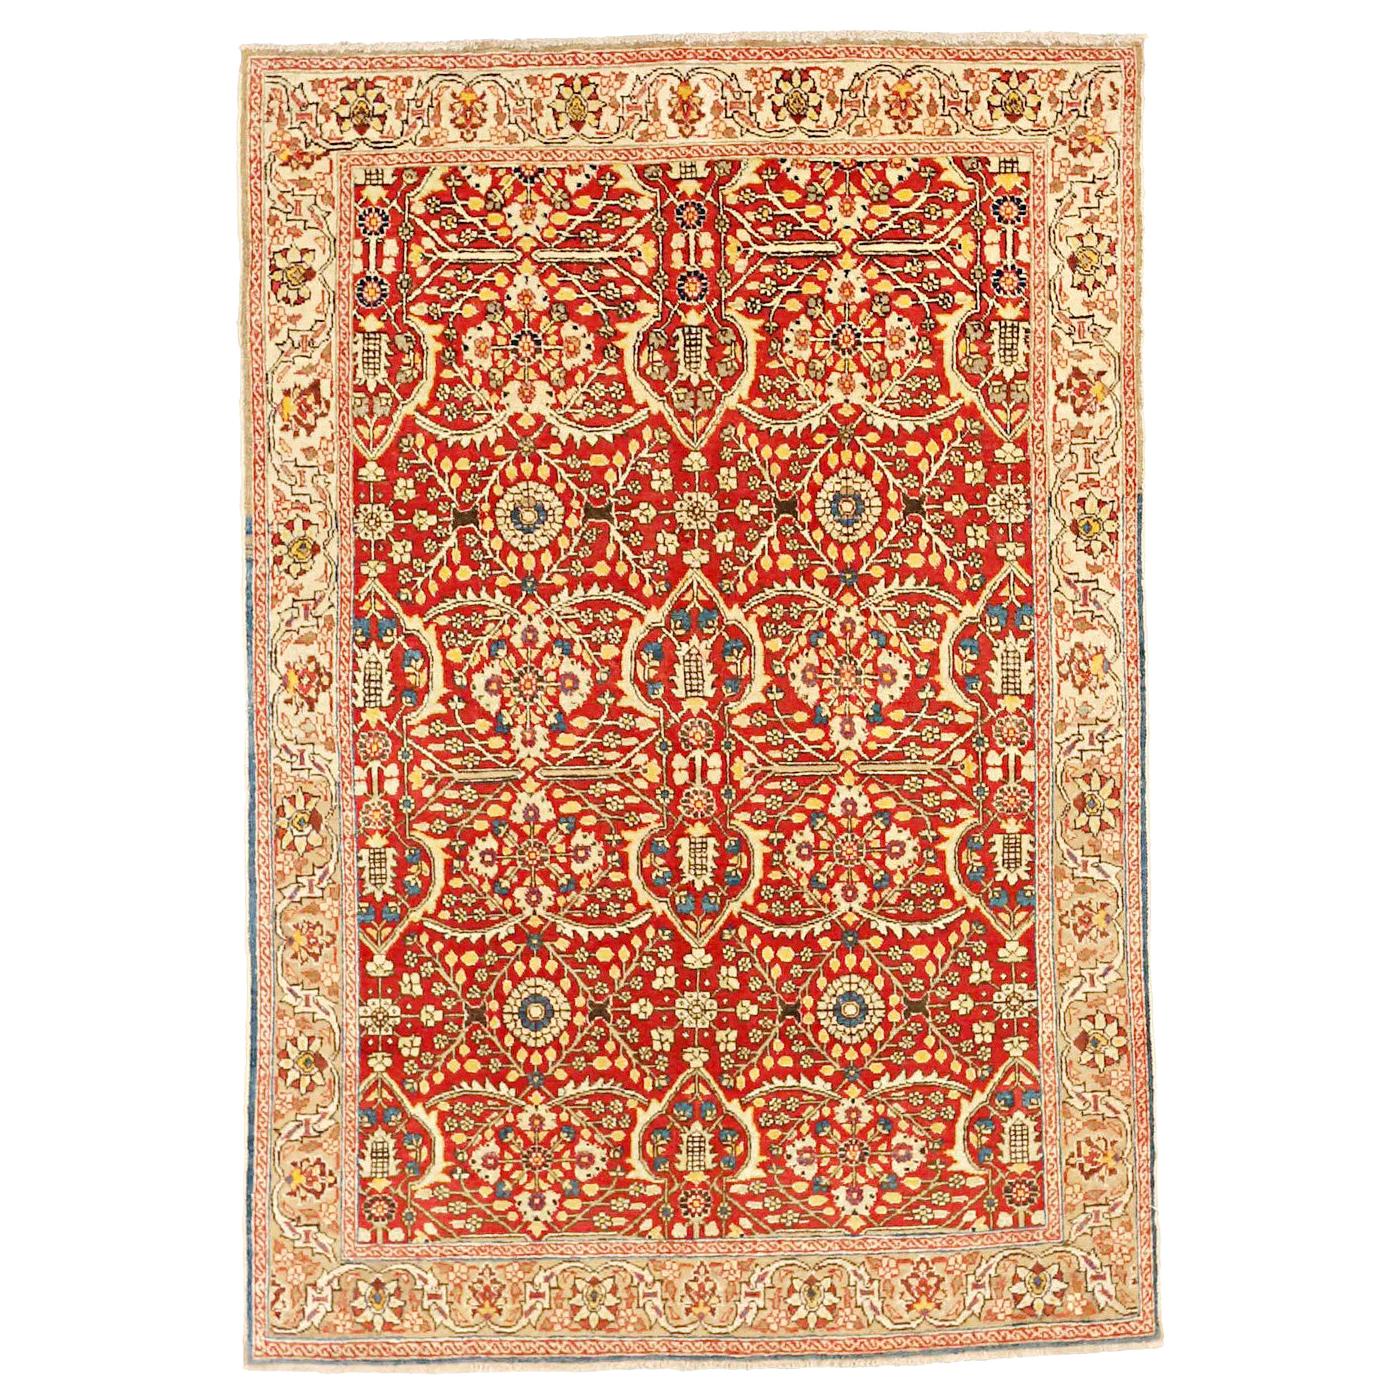 Antique Persian Tabriz Rug with Ivory and Navy Flower Details on Red Field